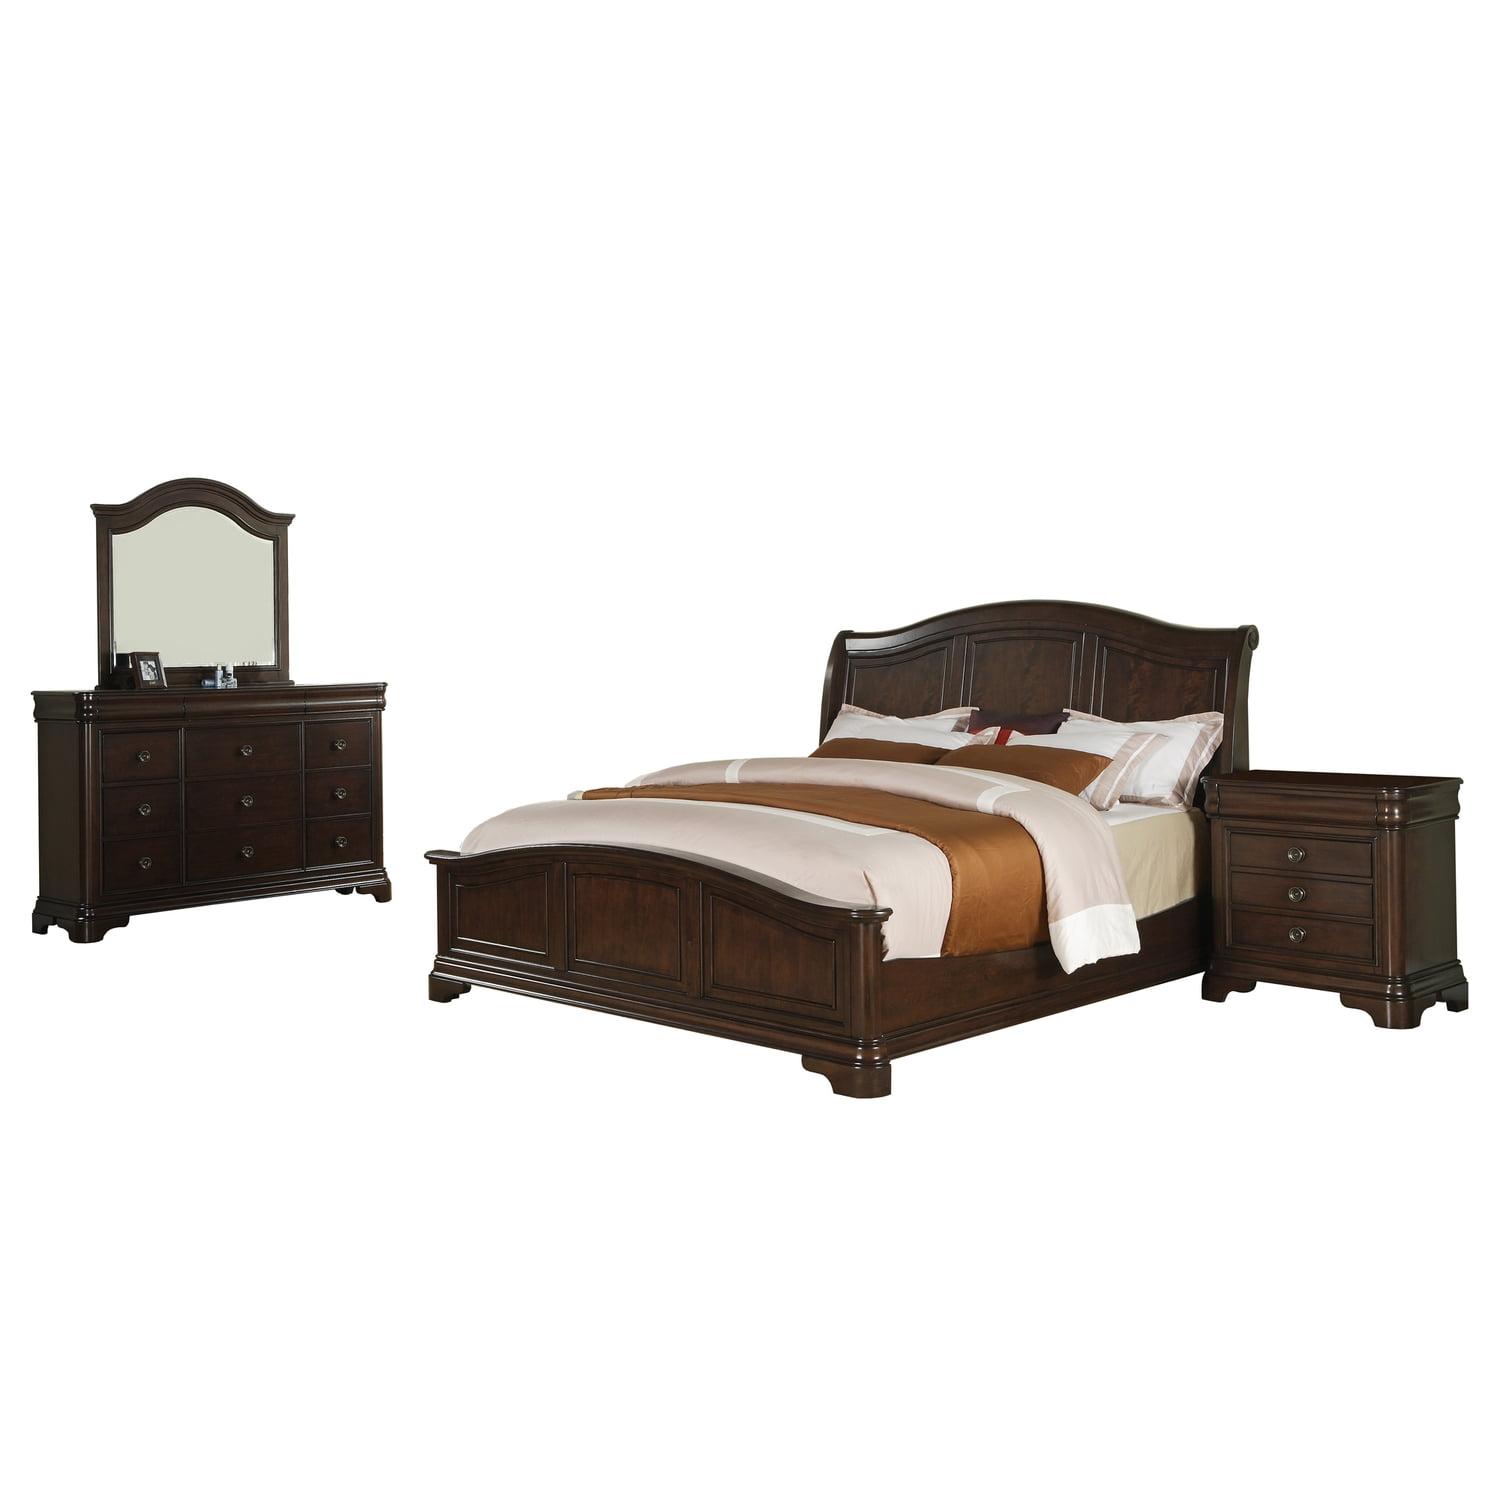 Conley Classic Cherry Queen Bedroom Set with Carved Details